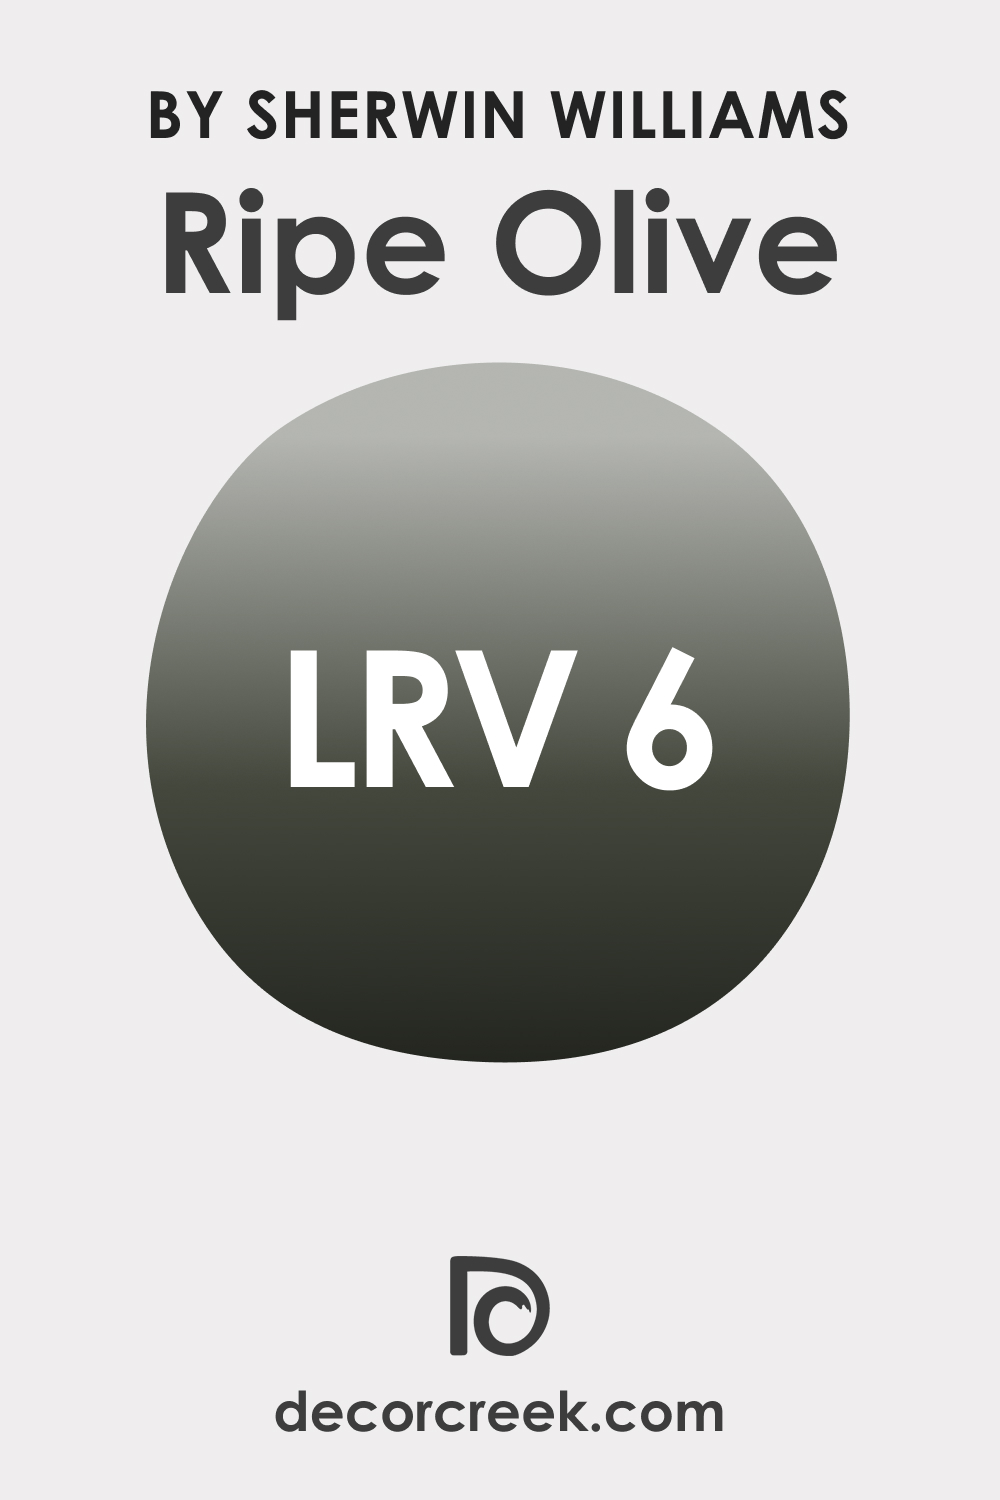 What LRV Does SW Ripe Olive Have?